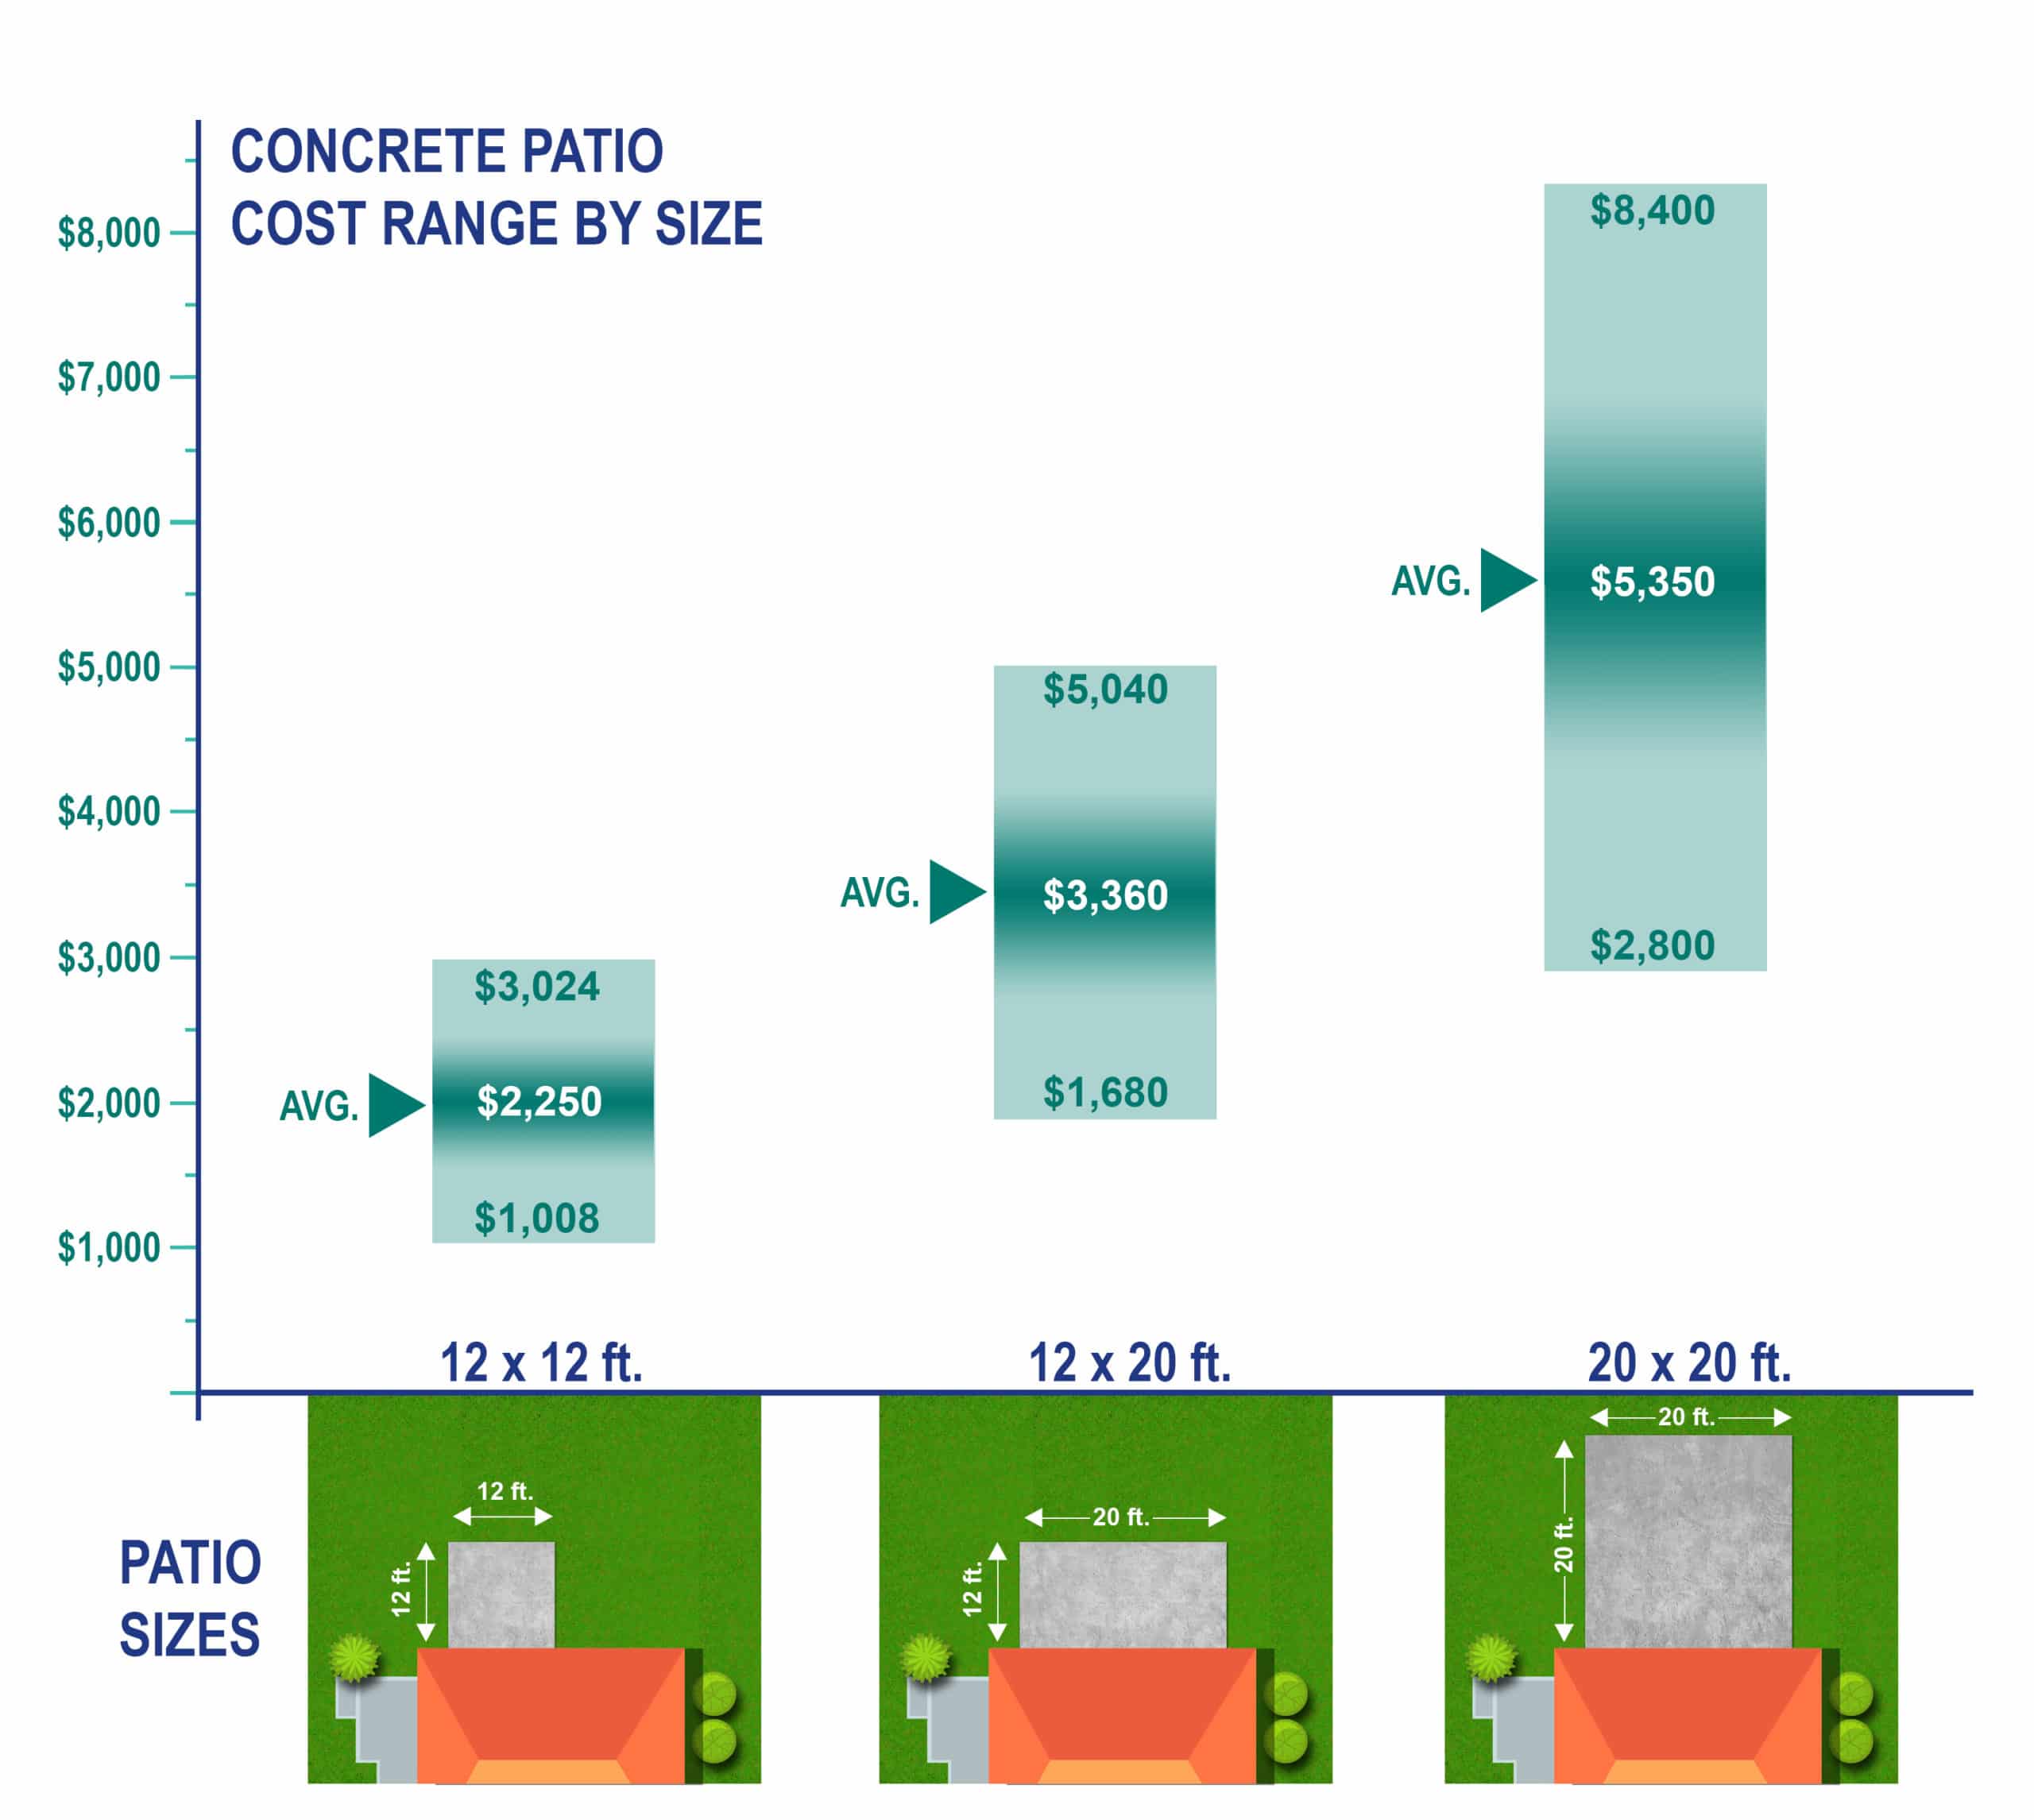 Cost overview by size of concrete patio